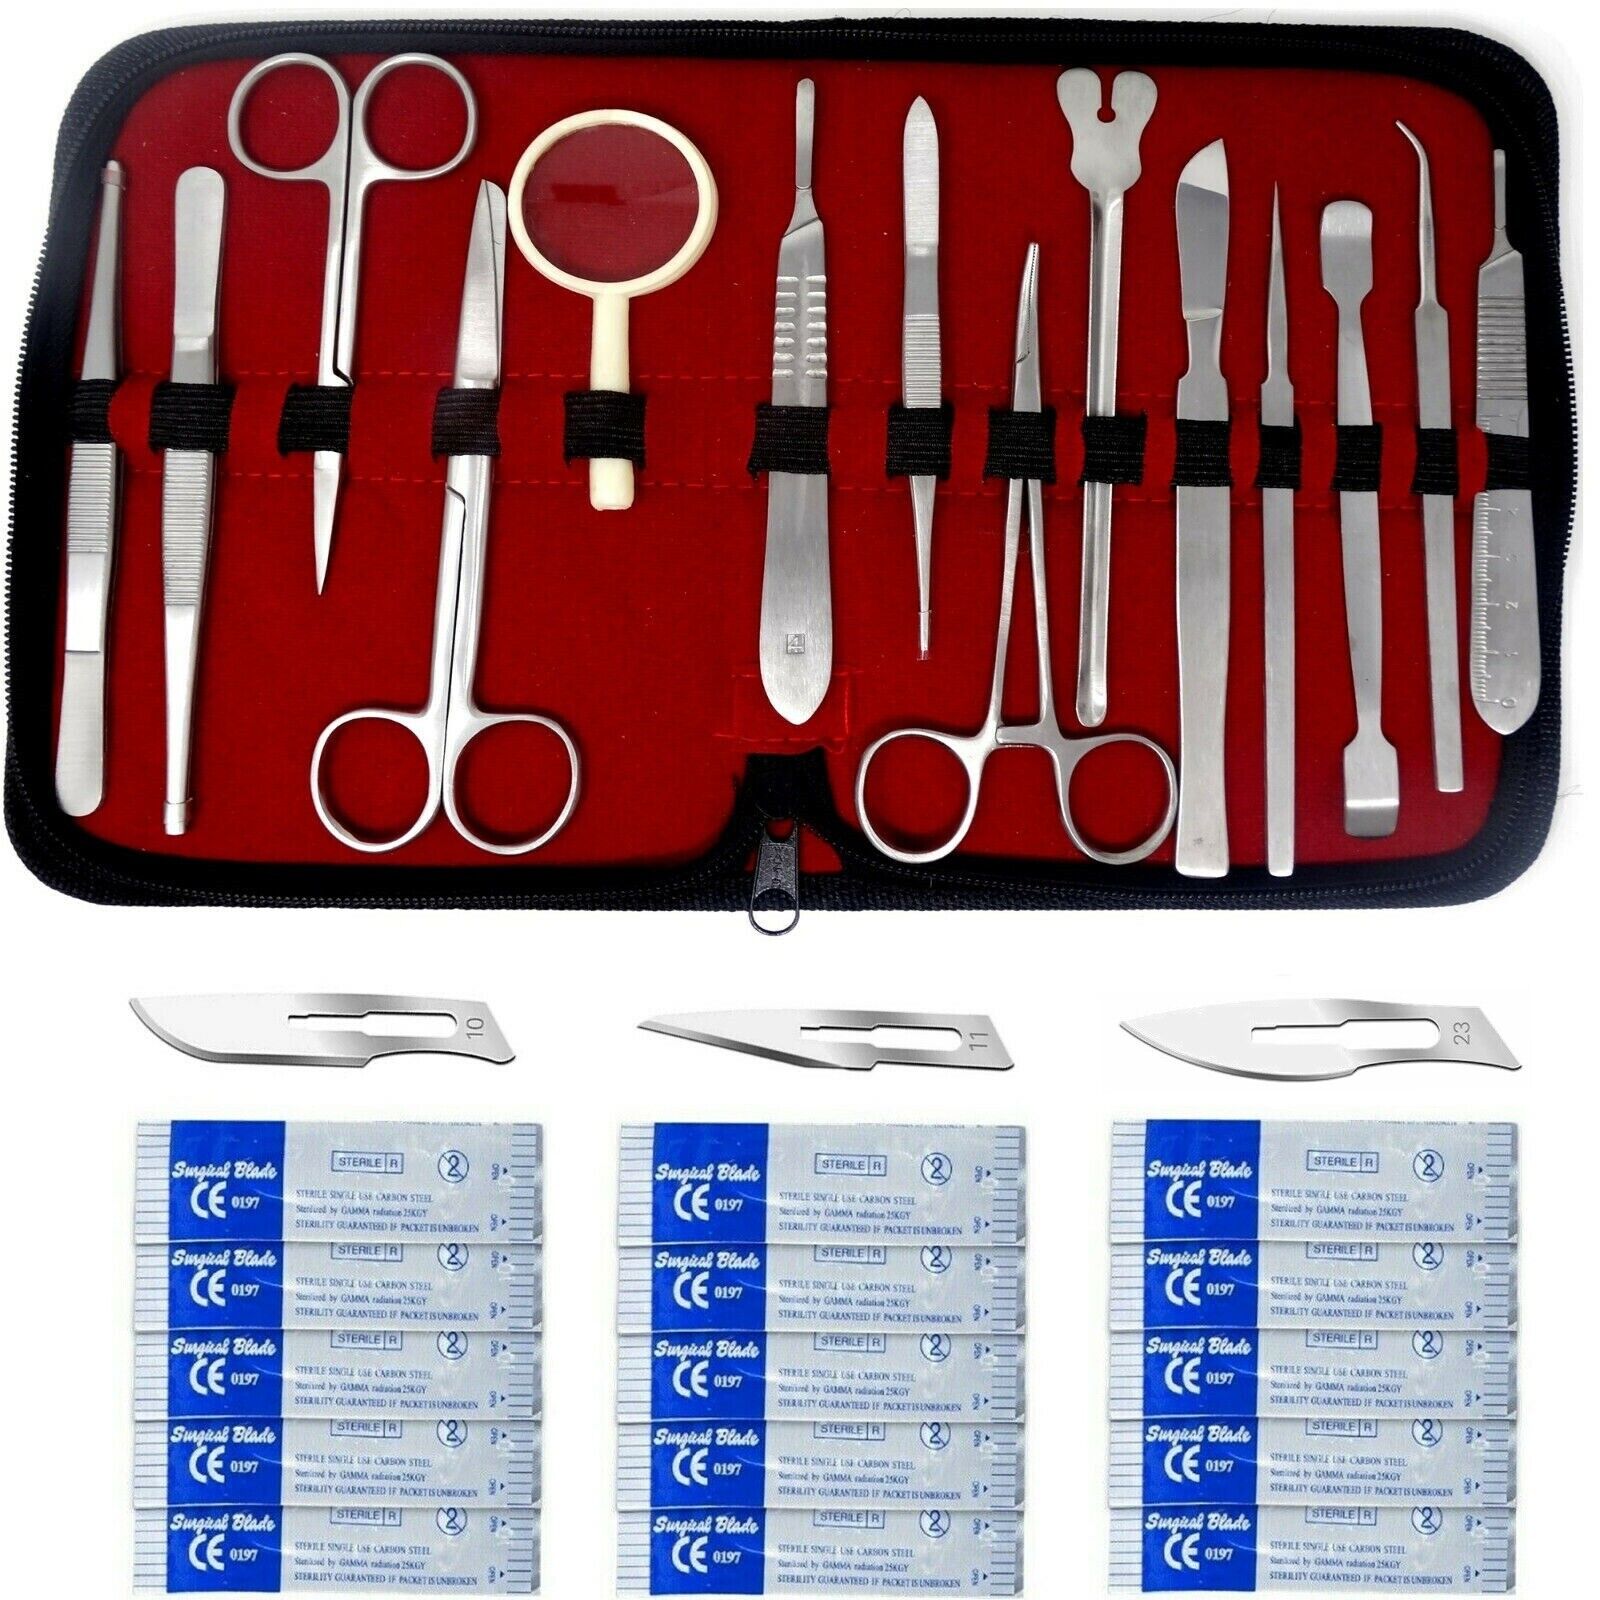 44 Pcs Science Students & Teacher Dissection Kit Advanced Dissection Instruments HTI Does Not Apply - фотография #3